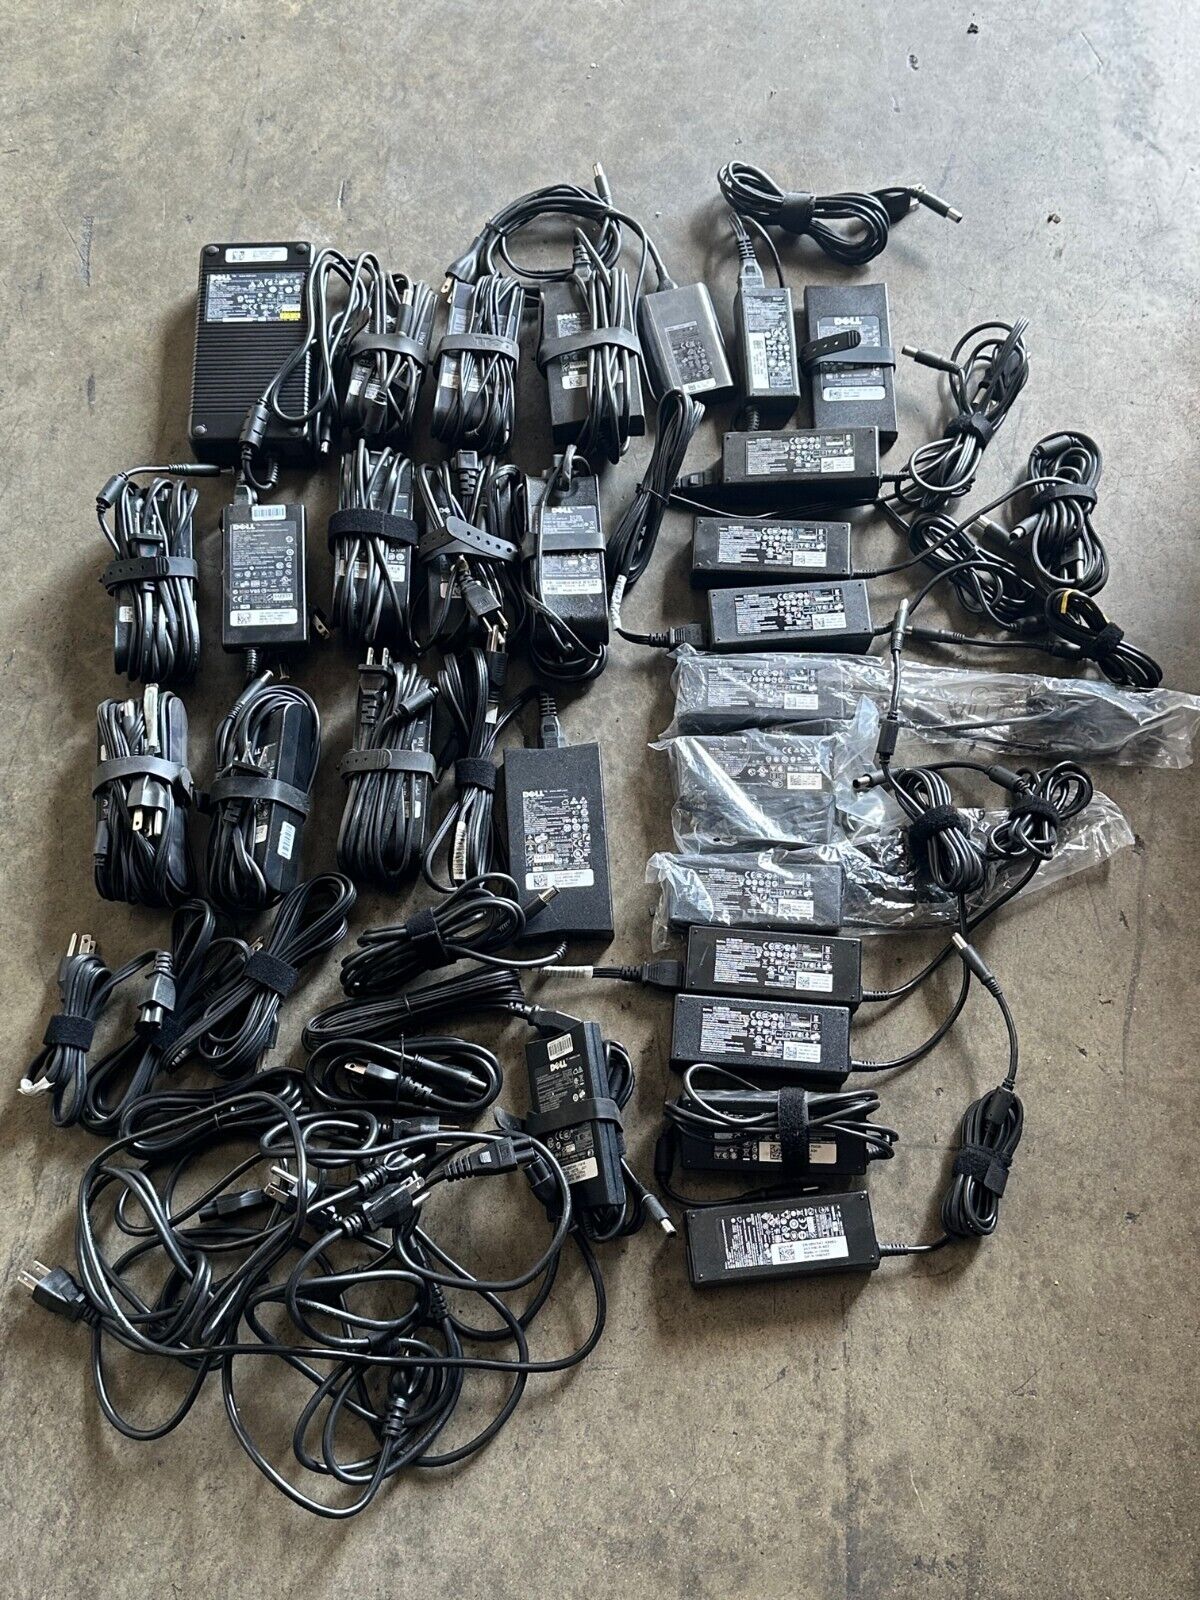 Lot of 27 Genuine Dell AC Adapters/Laptop Charges Big tip  - Mix